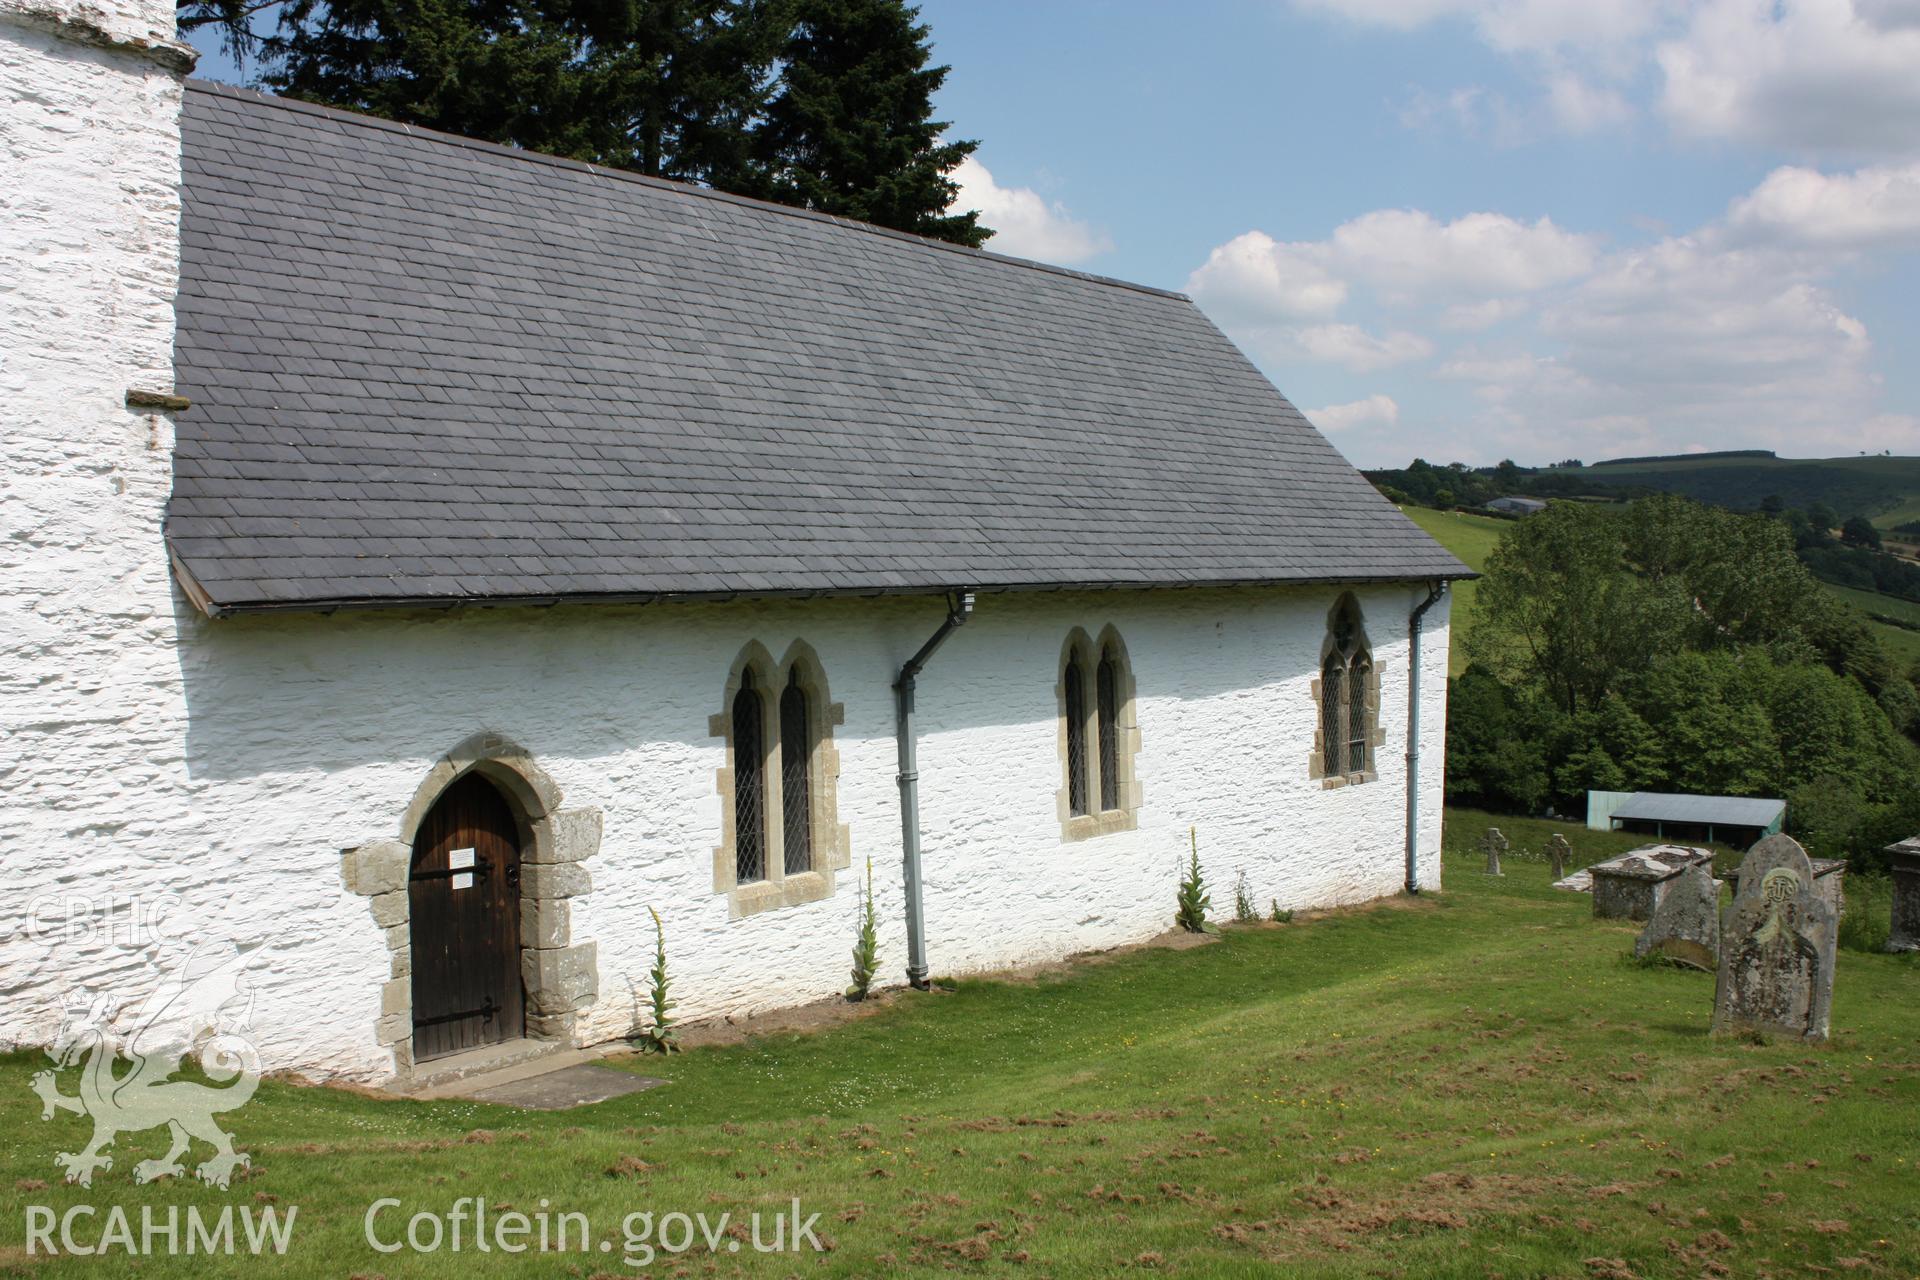 St Mary's Church, Pilleth. Exterior view of nave and entrance facade.